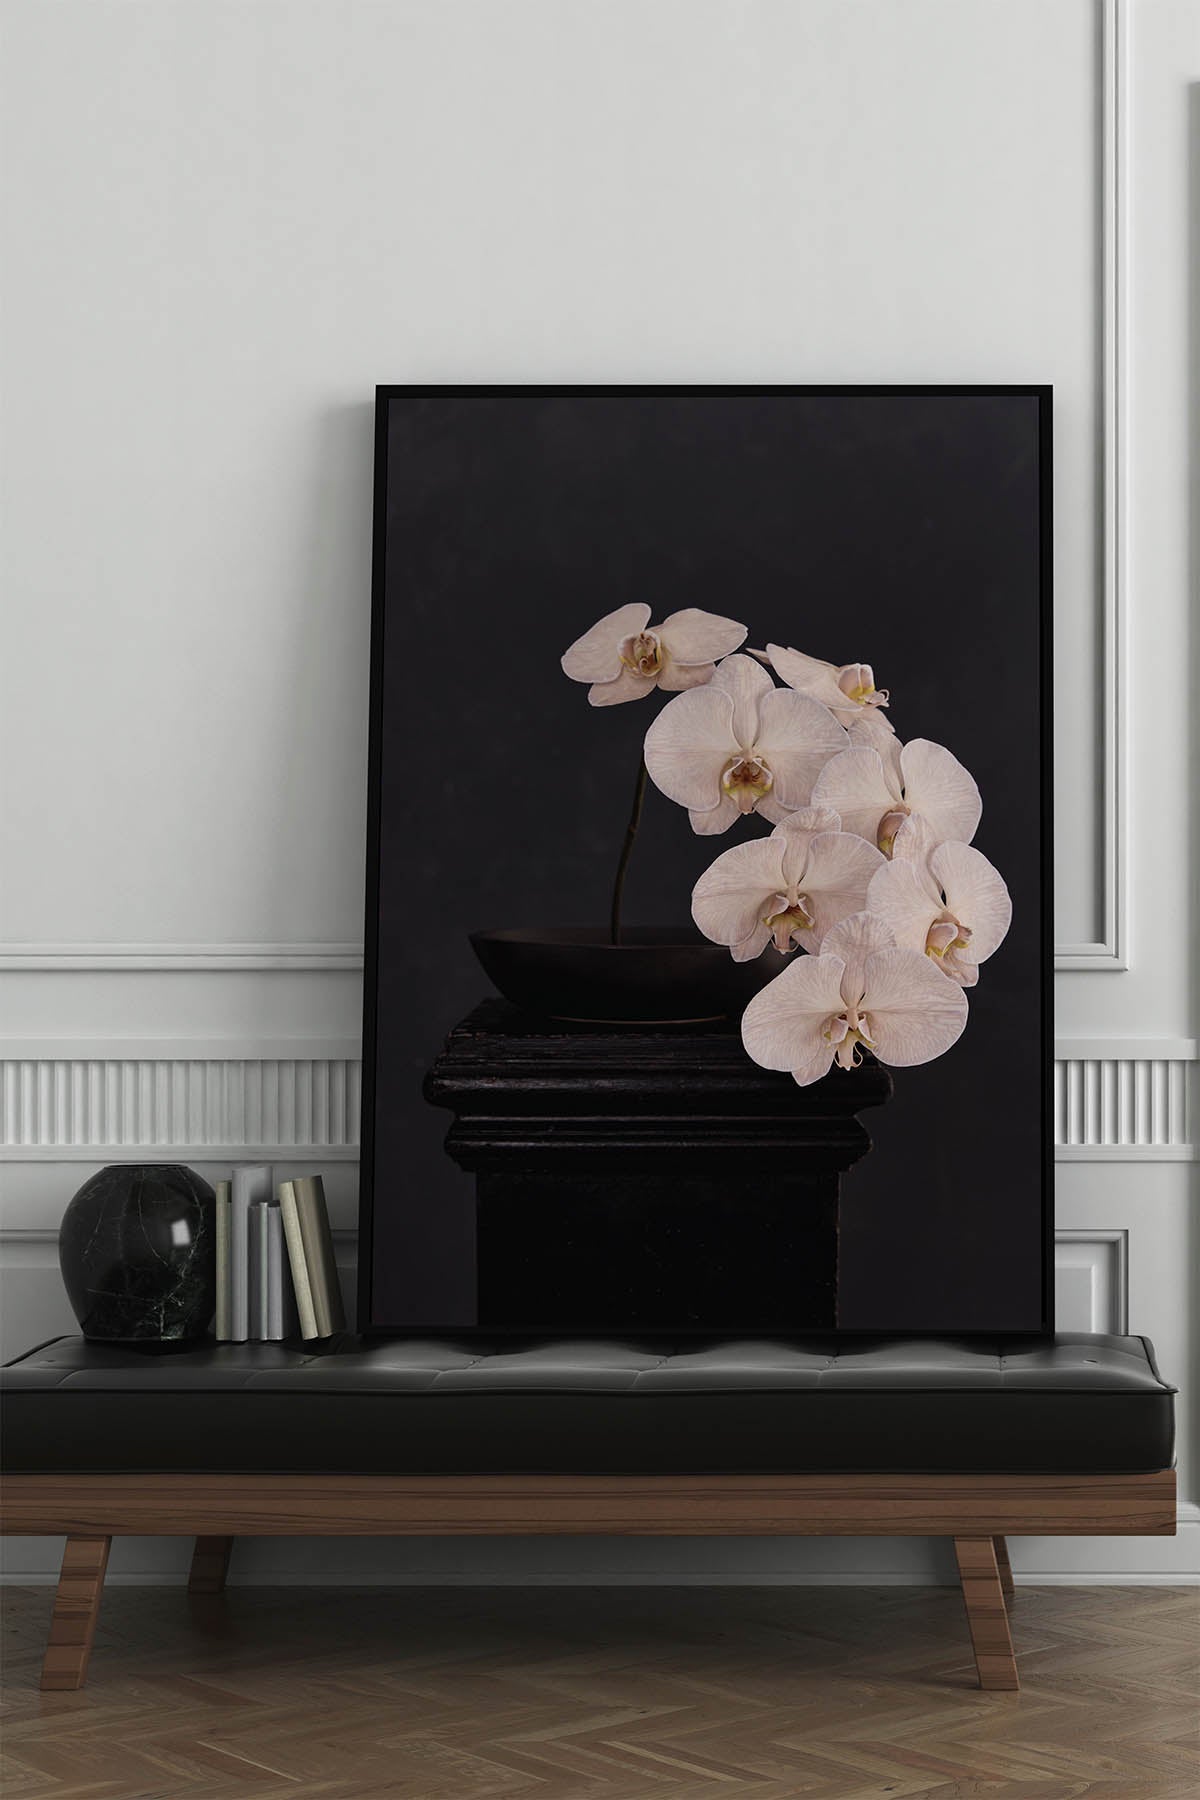 Fine Art Print Of A White Phaleanopsis Stem In A Black Bowl On A Black Mantle In An Entry Way With A Black Leather Bench.